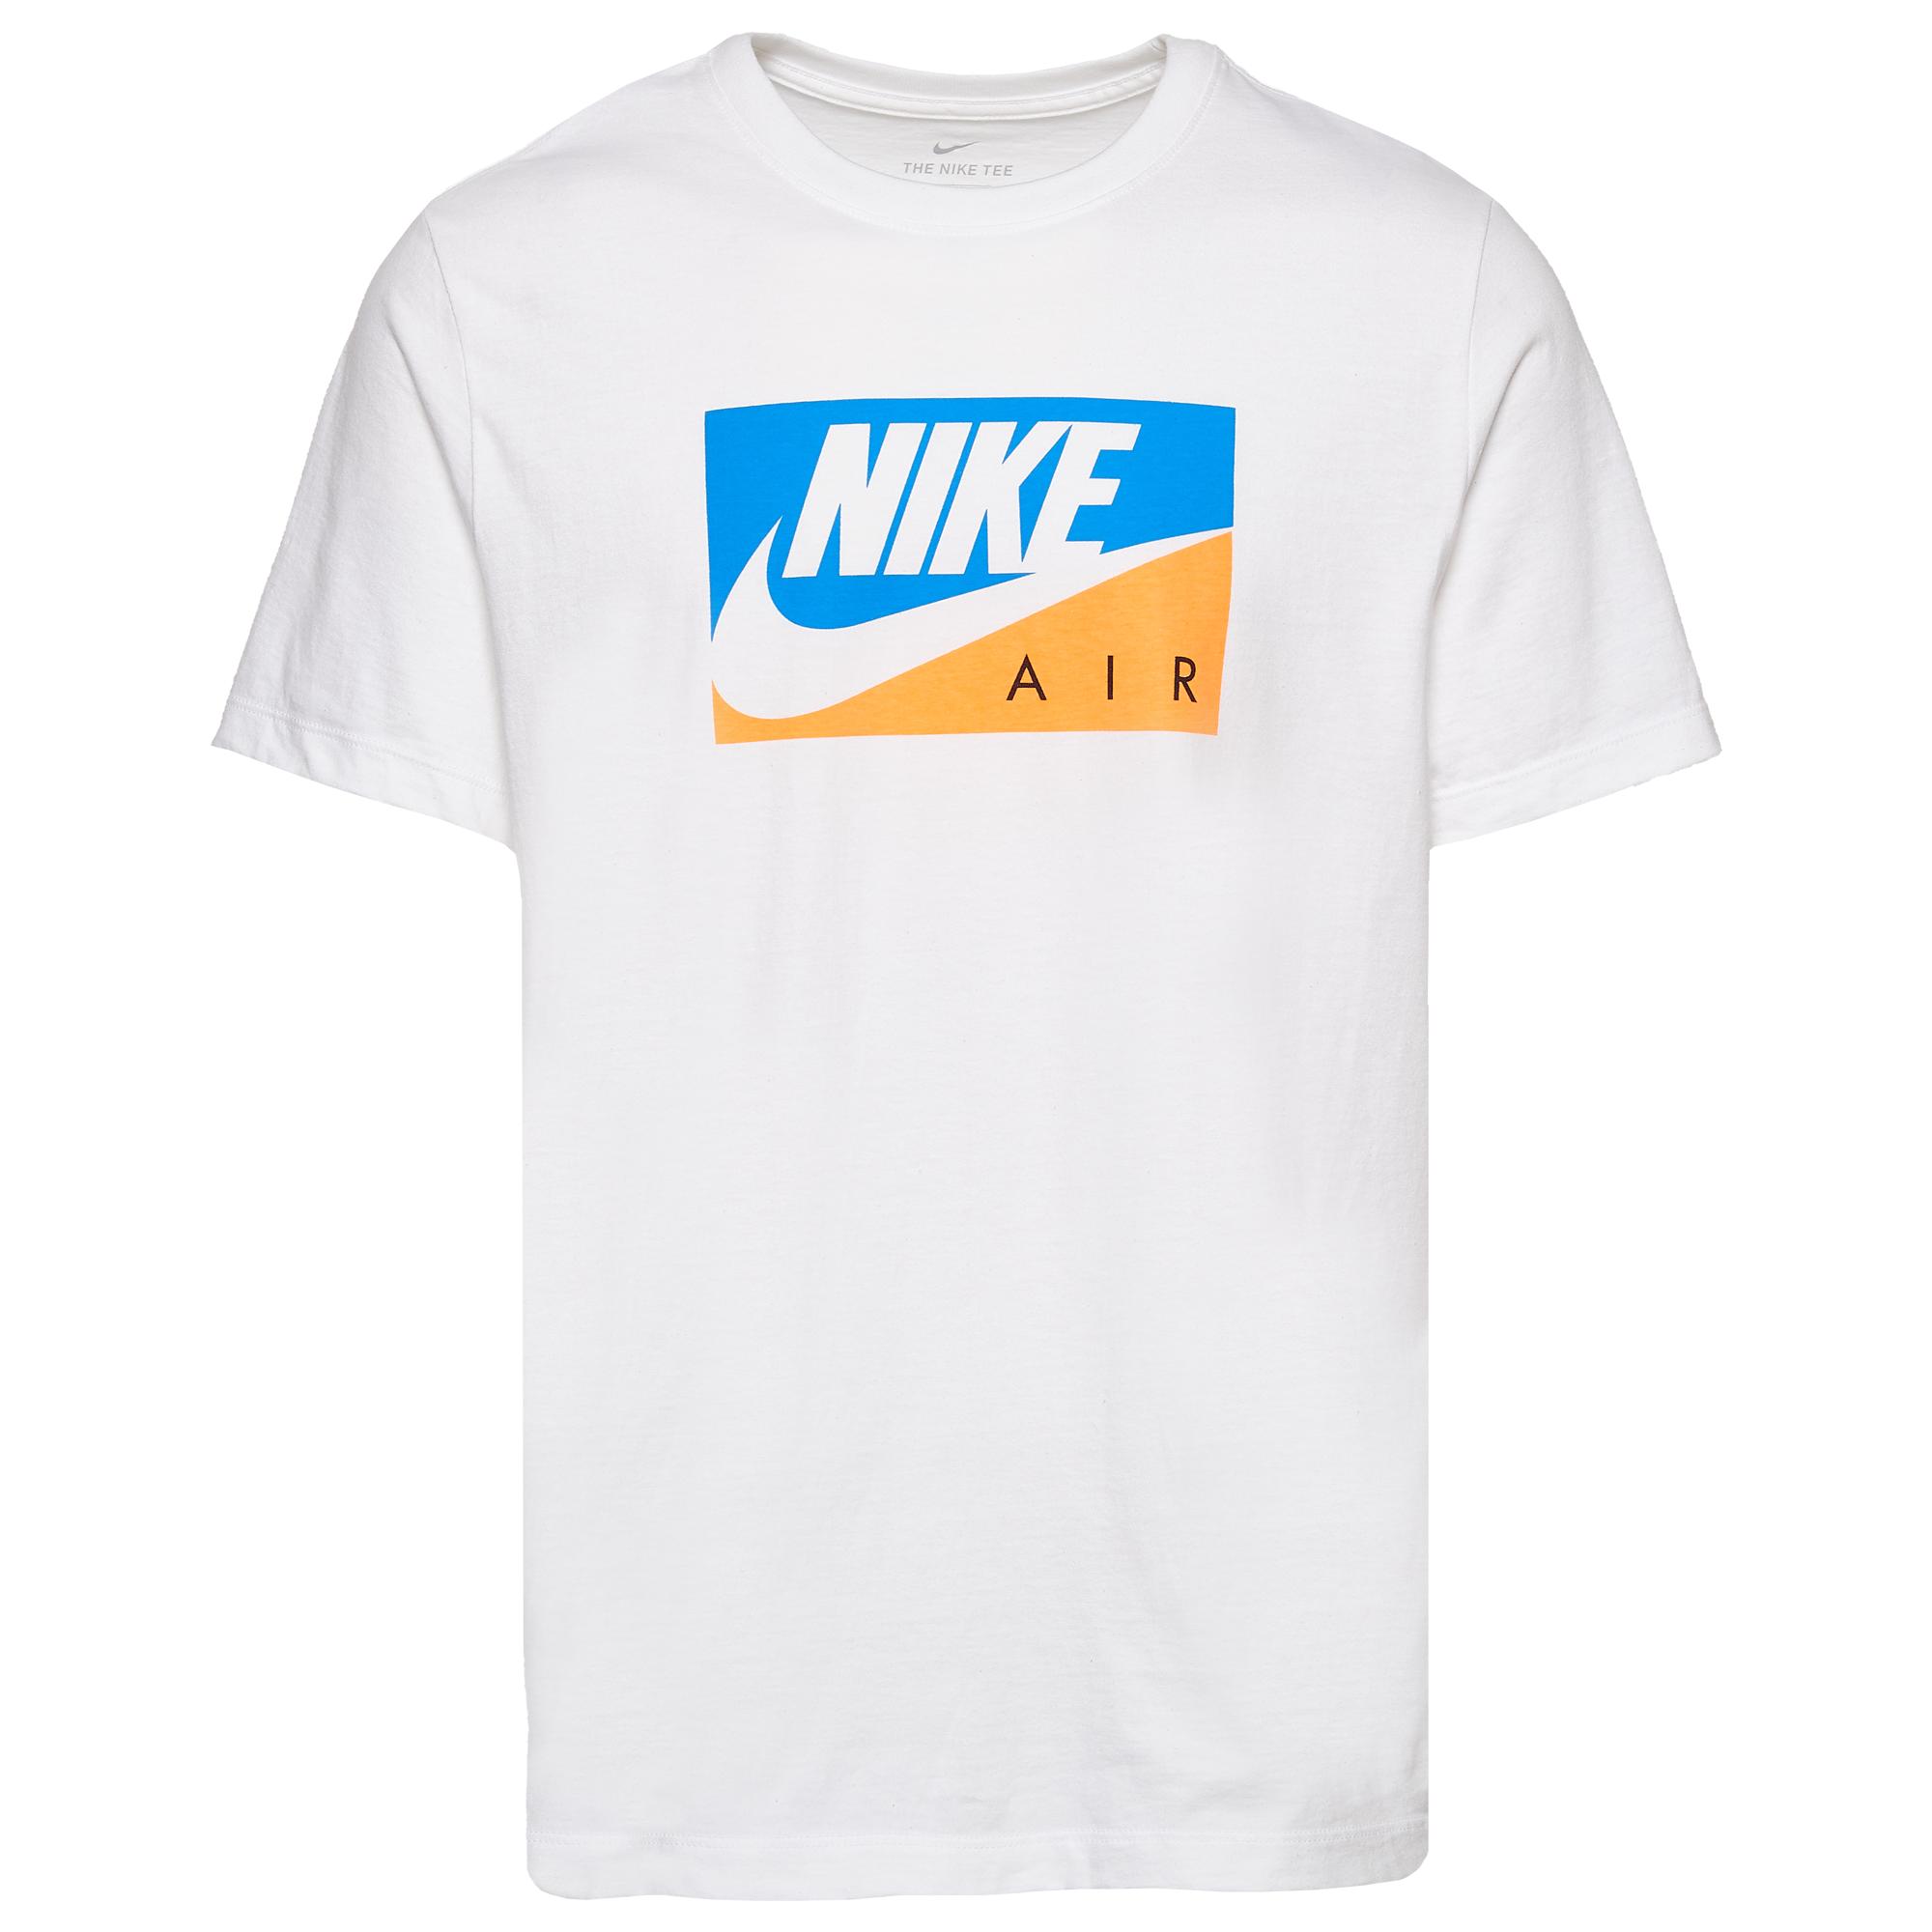 Nike Cotton Boxed Air T-shirt in White 